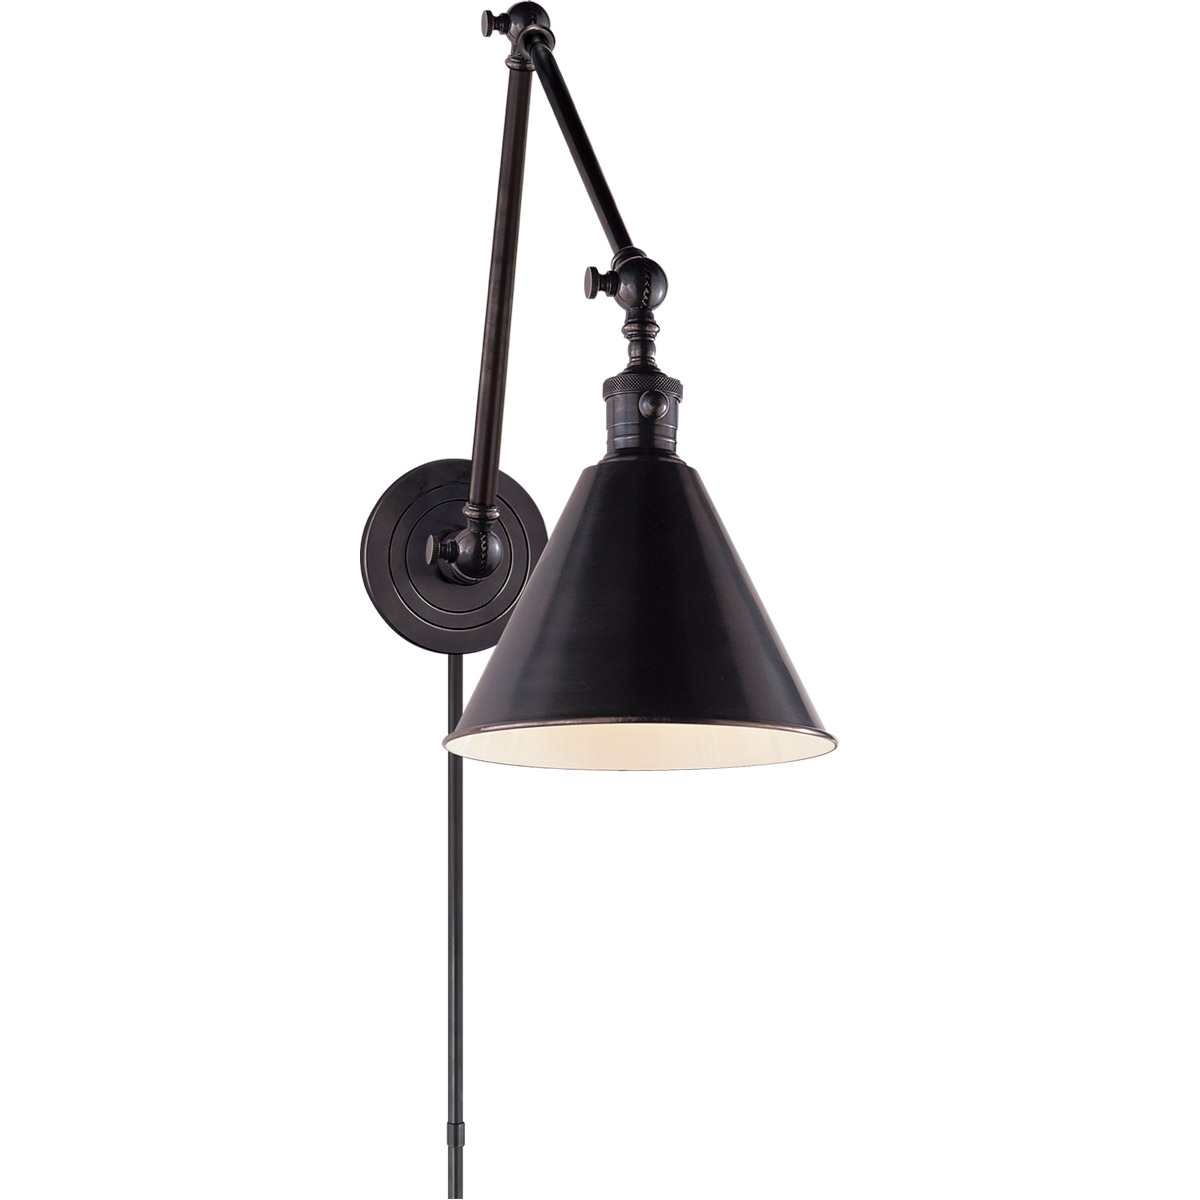 SL2923HAB by Visual Comfort - Boston Functional Double Arm Library Light in  Hand-Rubbed Antique Brass